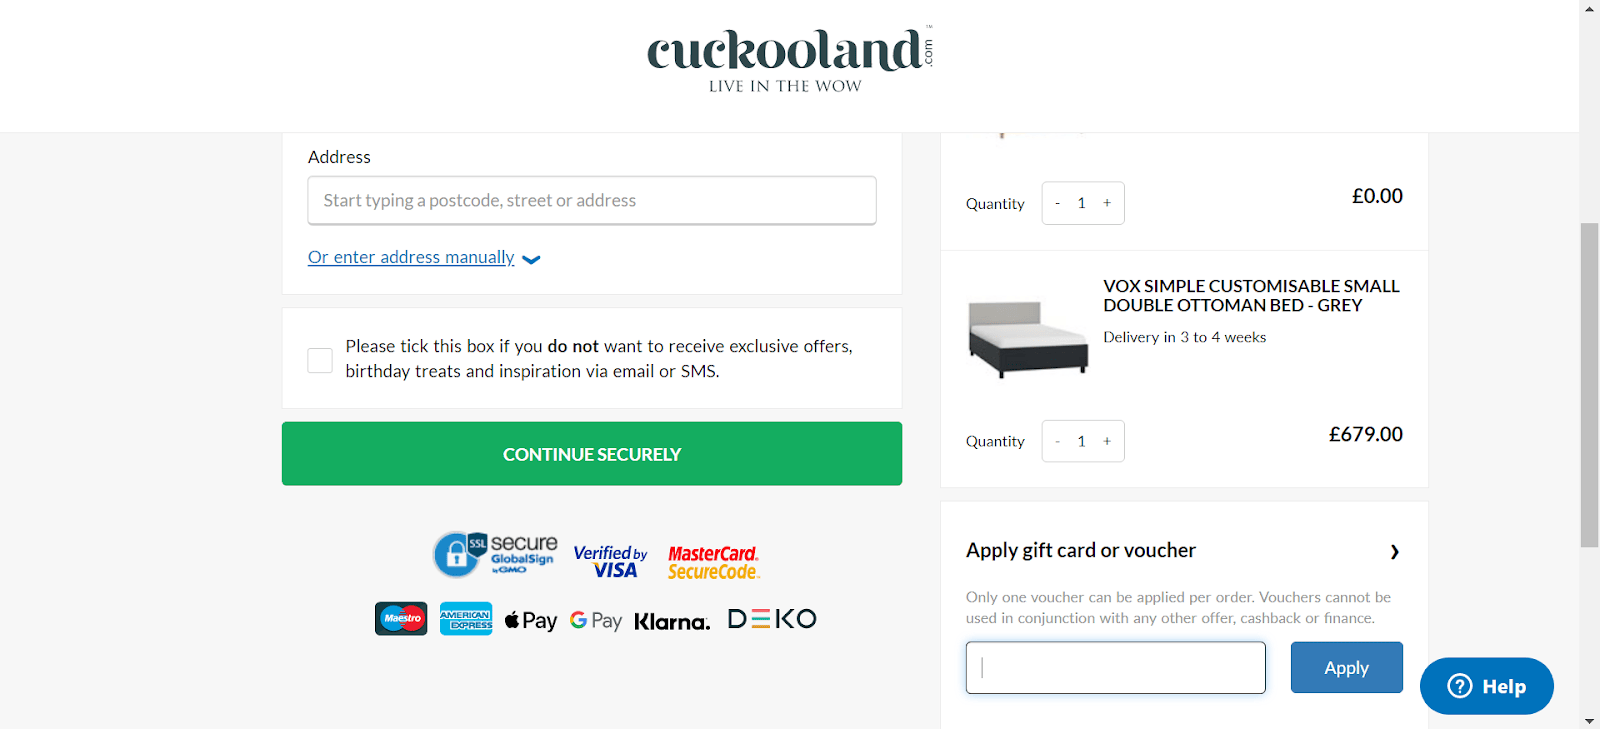 How To Use Cuckooland Discount Code 2